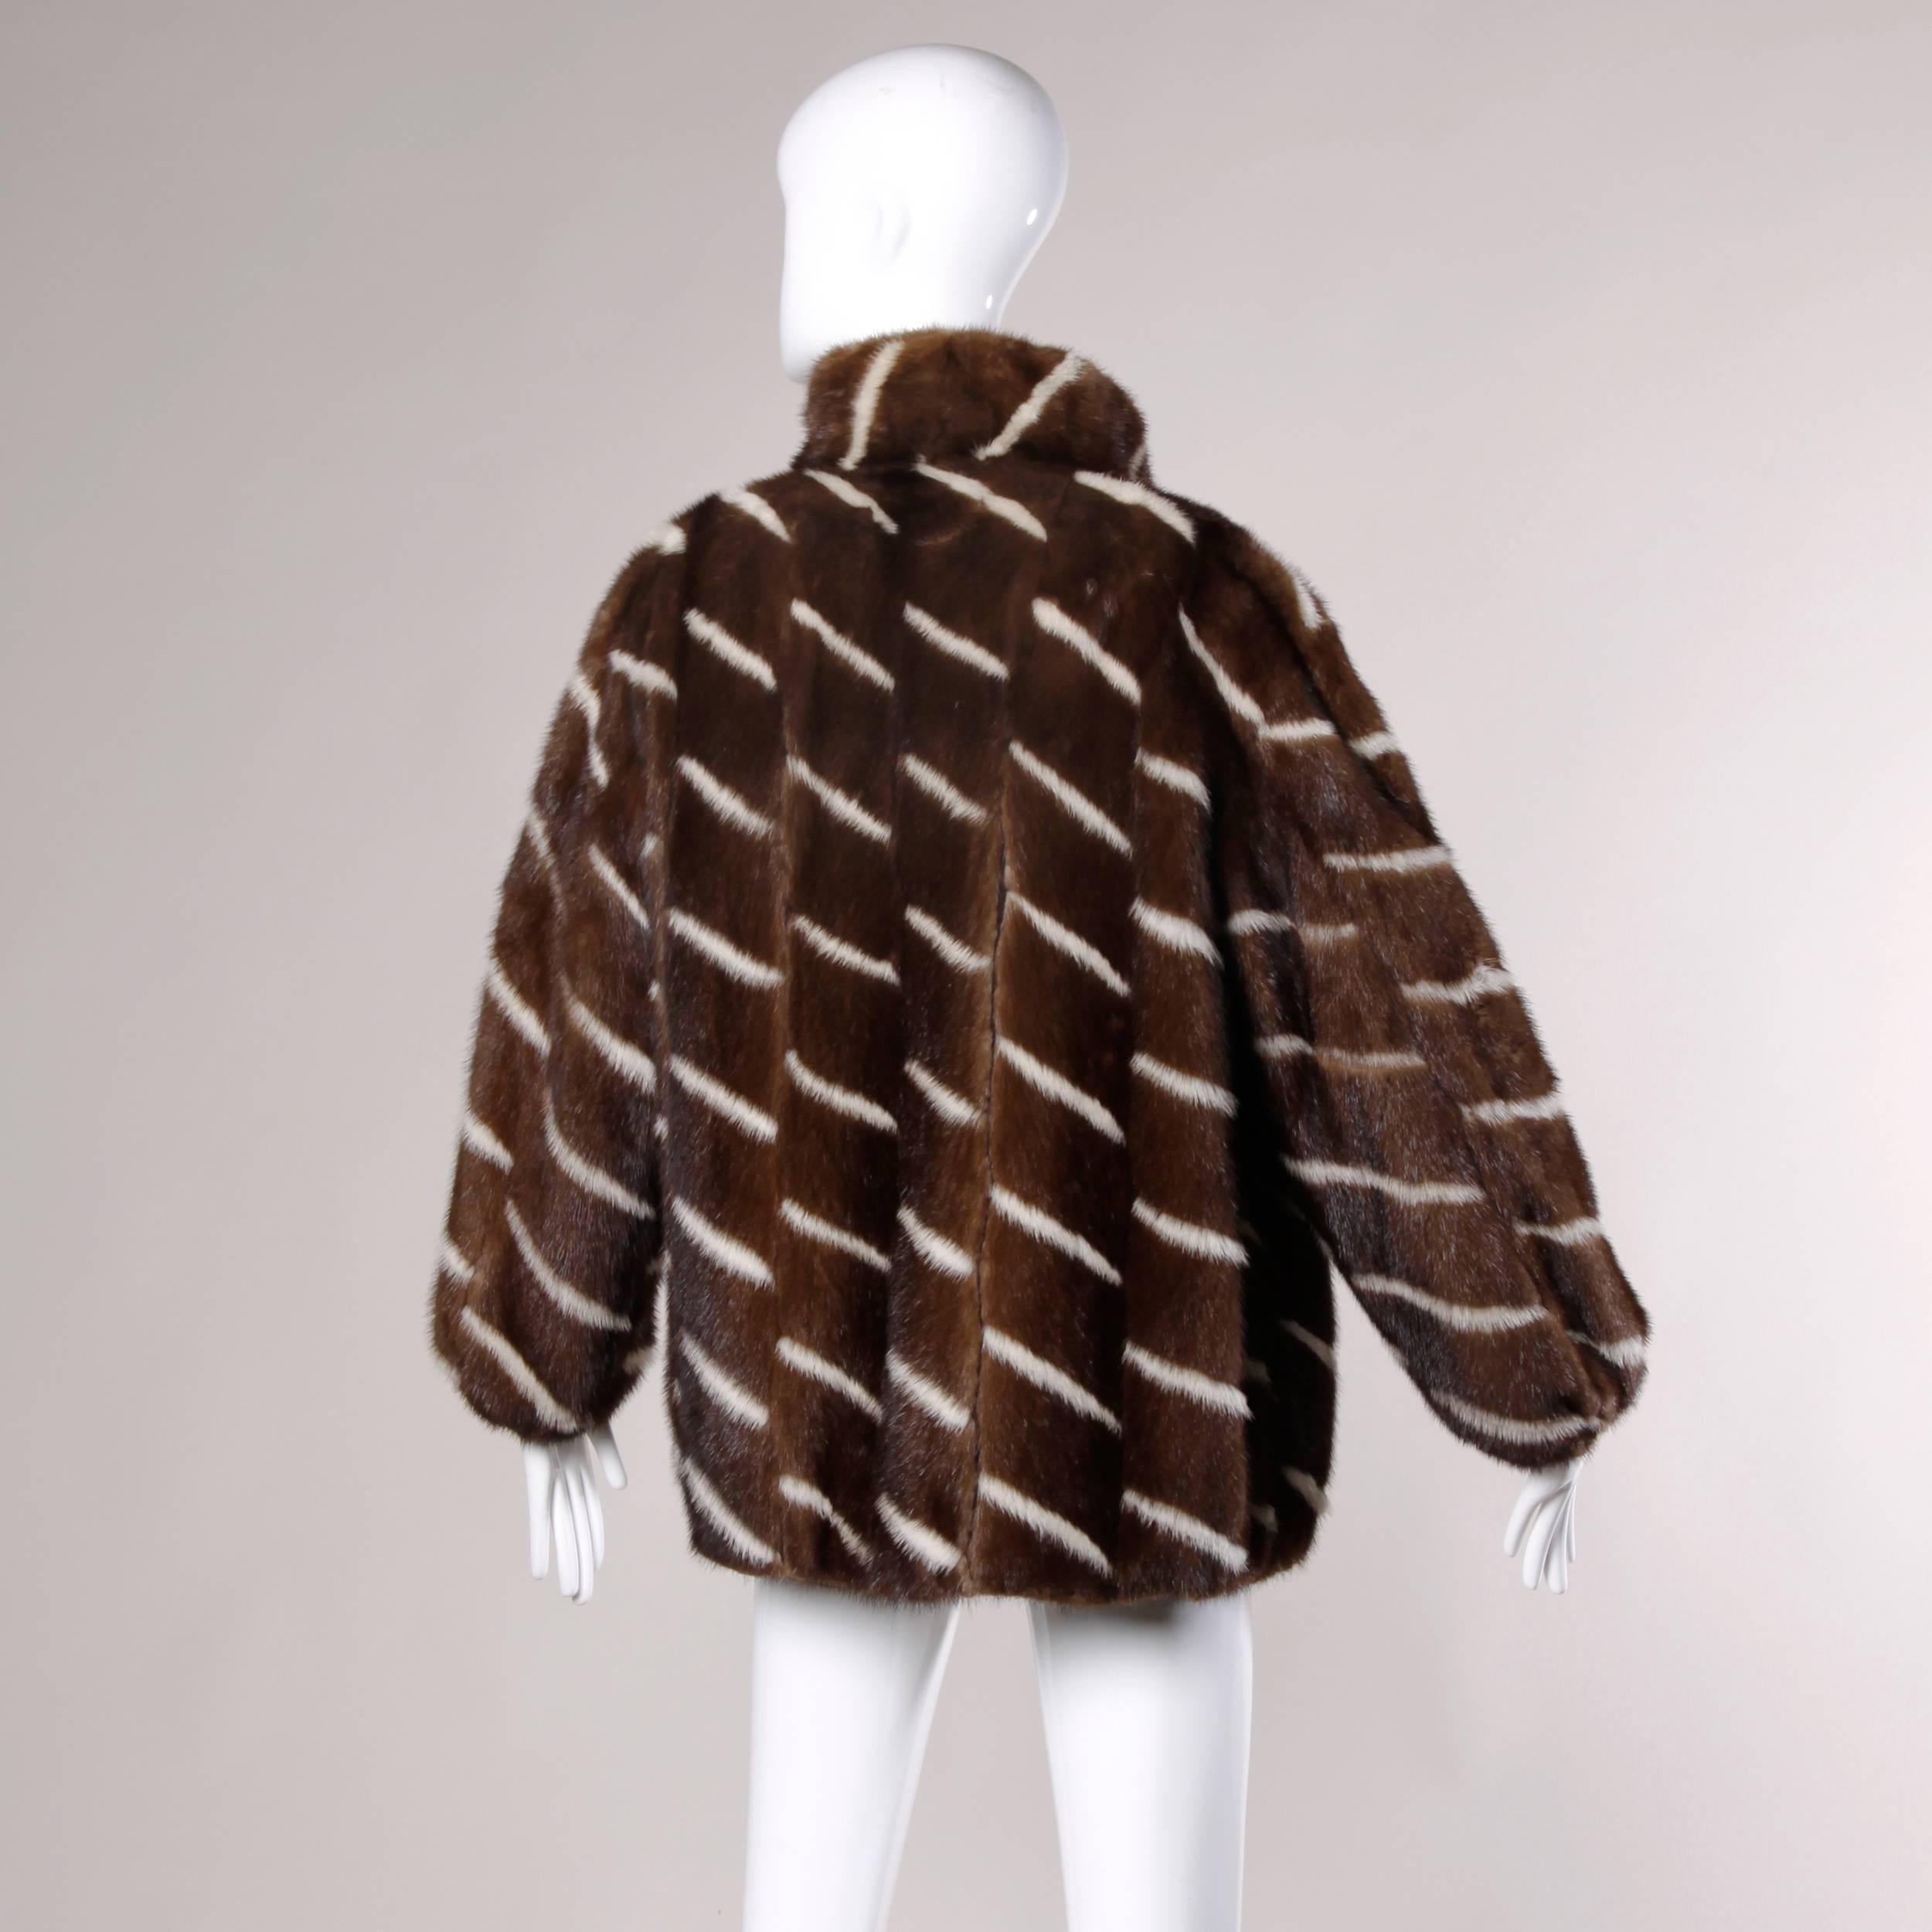 Striped brown and white mink fur coat with leather lining and oversize fit.

Details:

Fully Lined
Front Hook Closure
Marked Size: Not Marked
Estimated Size: S/M/L (Oversize Fit)
Color: Brown/ White
Fabric: Genuine Mink Fur/ Leather
Label: